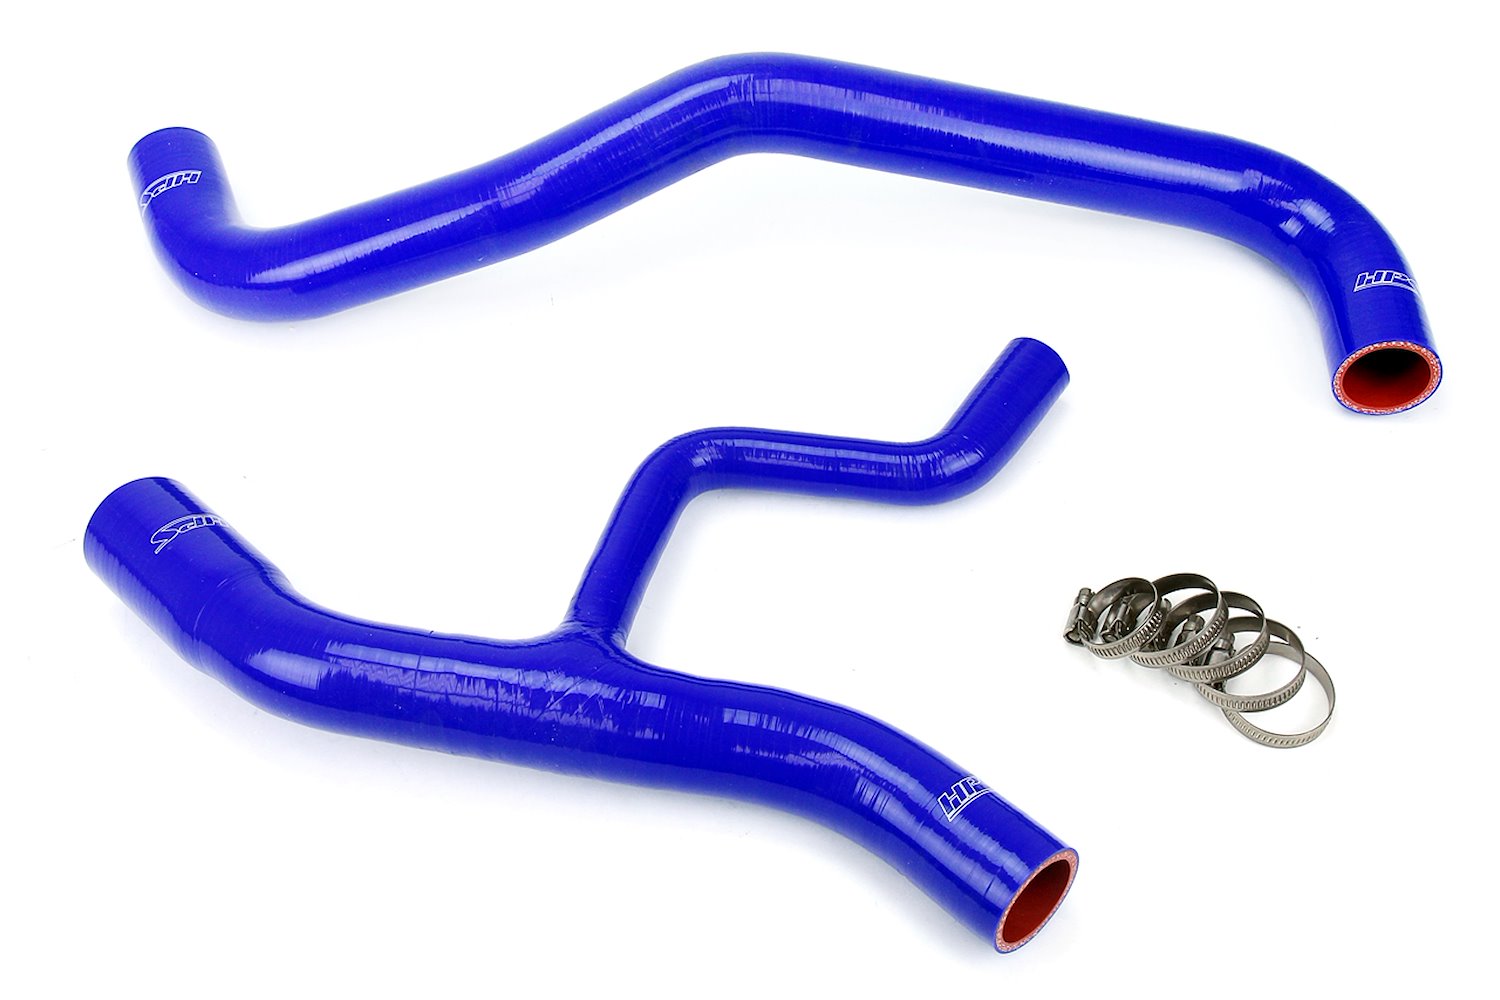 57-1012-BLUE Radiator Hose Kit, High-Temp 3-Ply Reinforced Silicone, Replace OEM Rubber Radiator Coolant Hoses